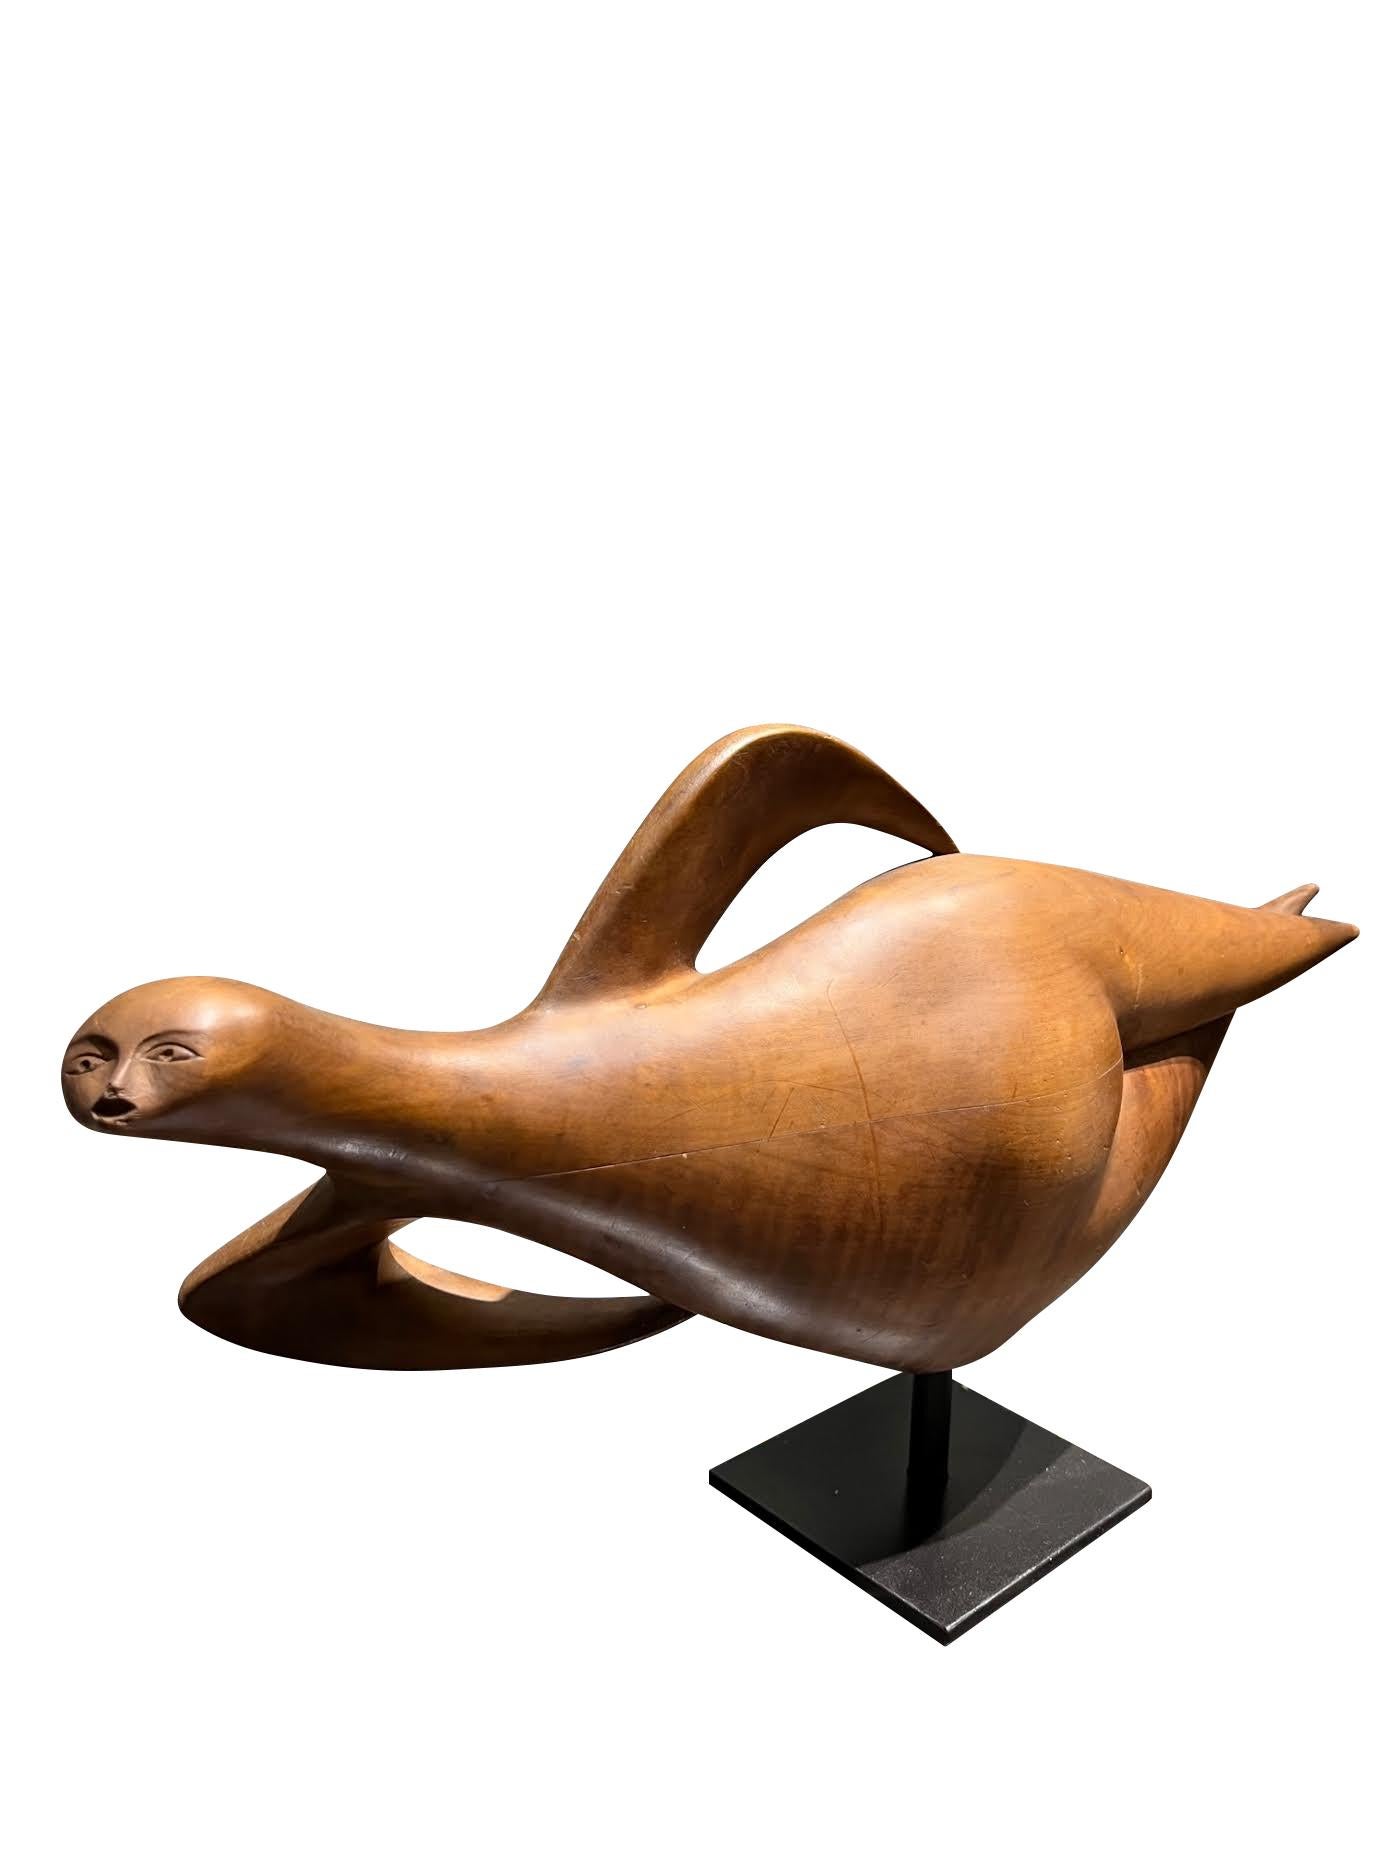 French Wooden Abstract Female Sculpture, France, 1960s